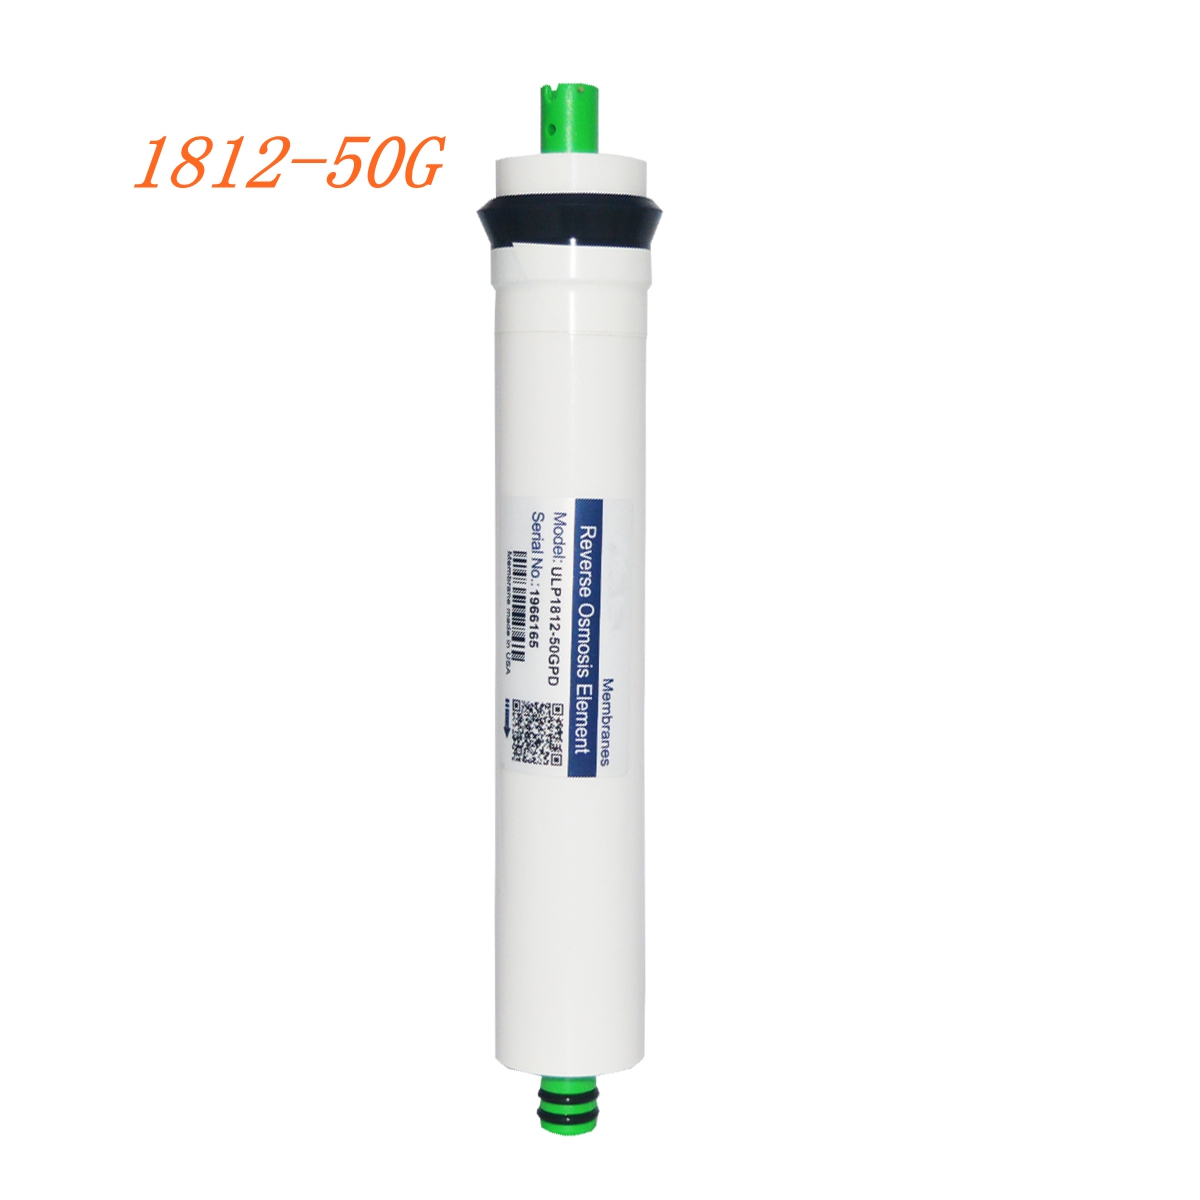 Reverse-Osmosis-Membrane-Replacement-RO-Water-System-Filter-5075100125150400G-1425879-9